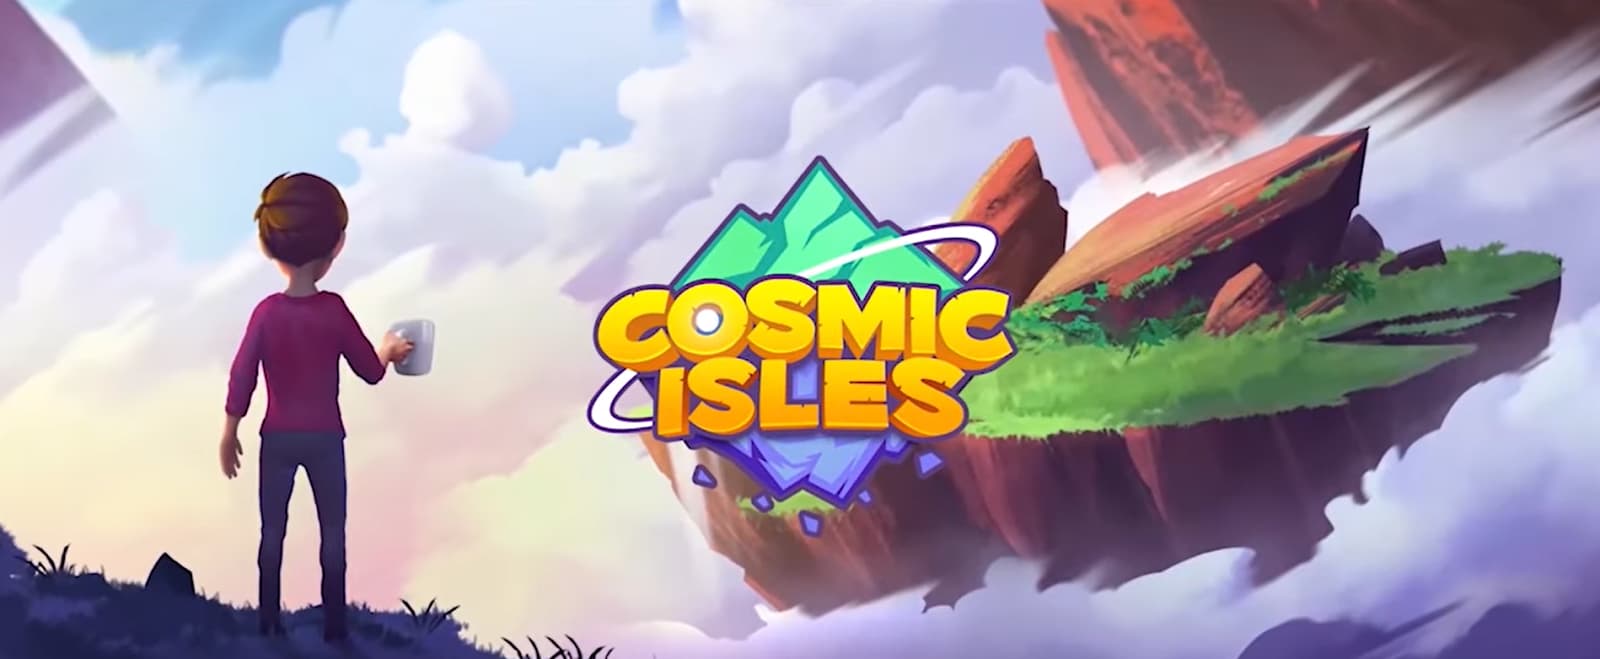 The logo for "Cosmic Isles" against a backdrop of floating land masses